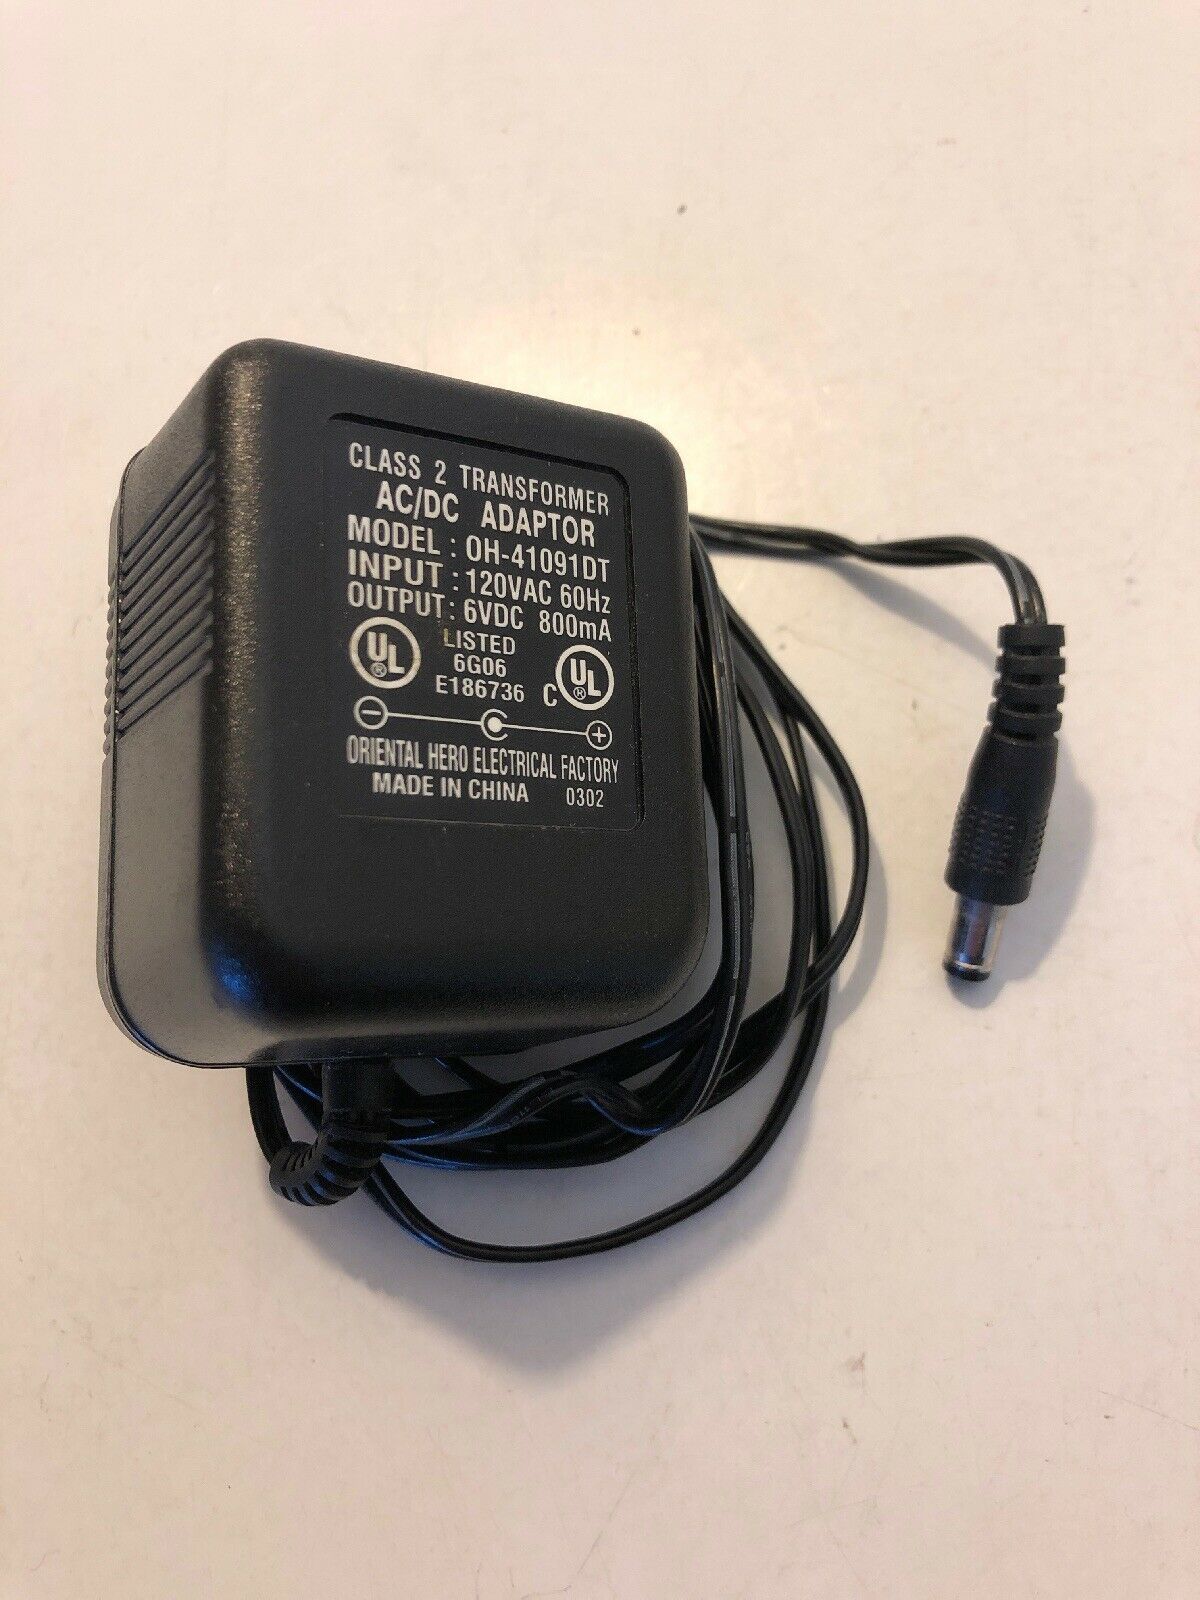 New 6V 800mA OH-41091DT Class 2 Transformer Ac Adapter - Click Image to Close